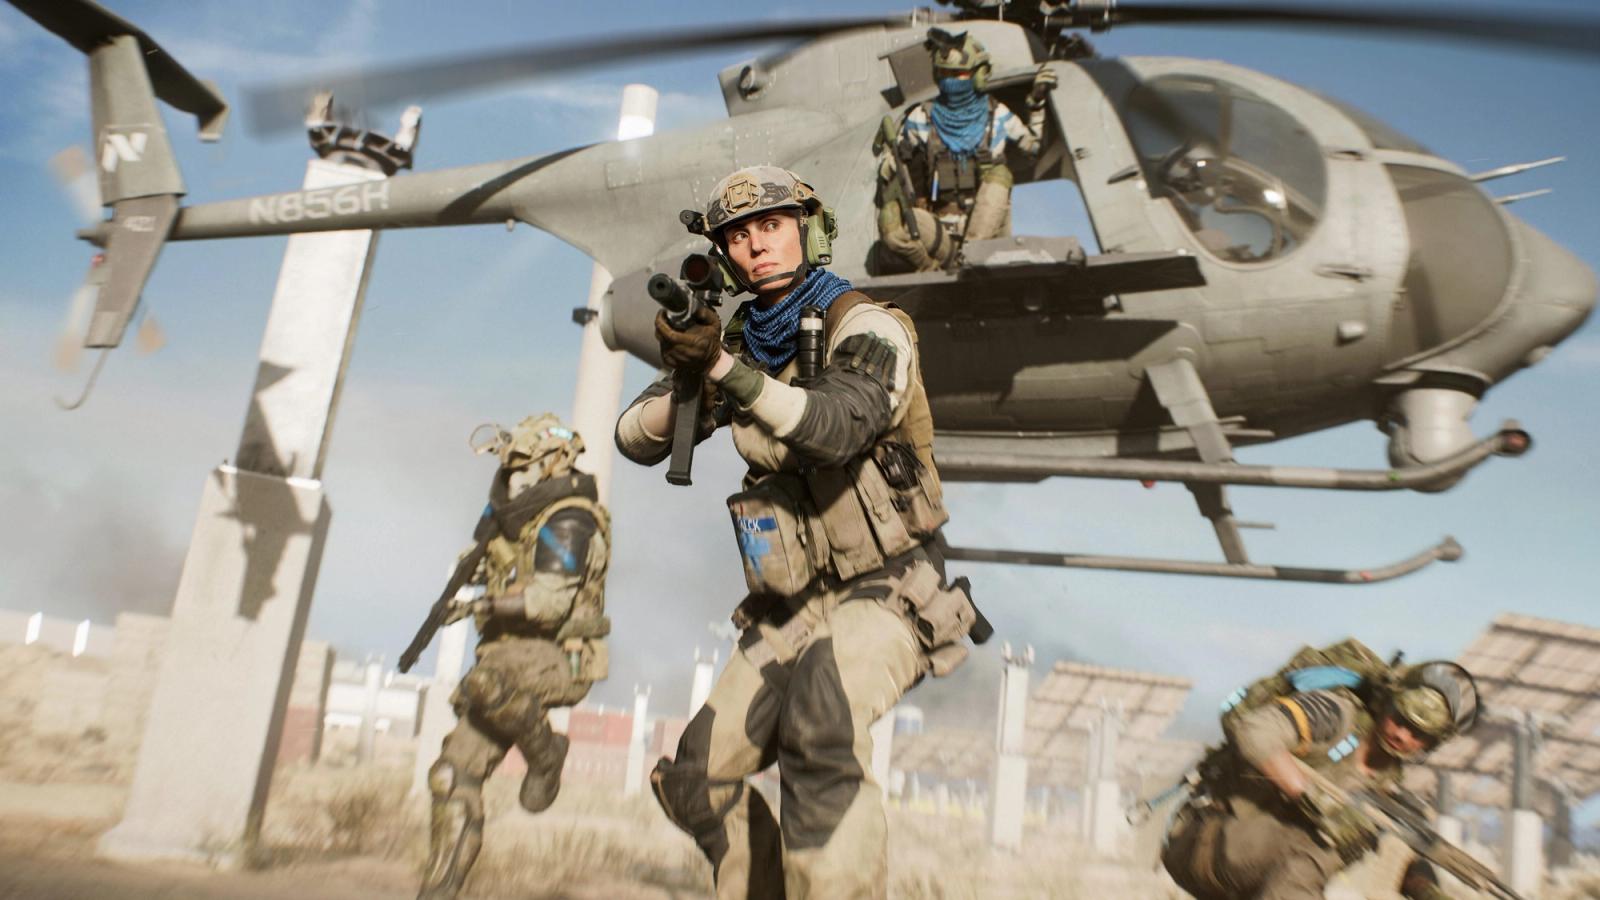 Several specialists in Battlefield 2042 exit a helicopter.